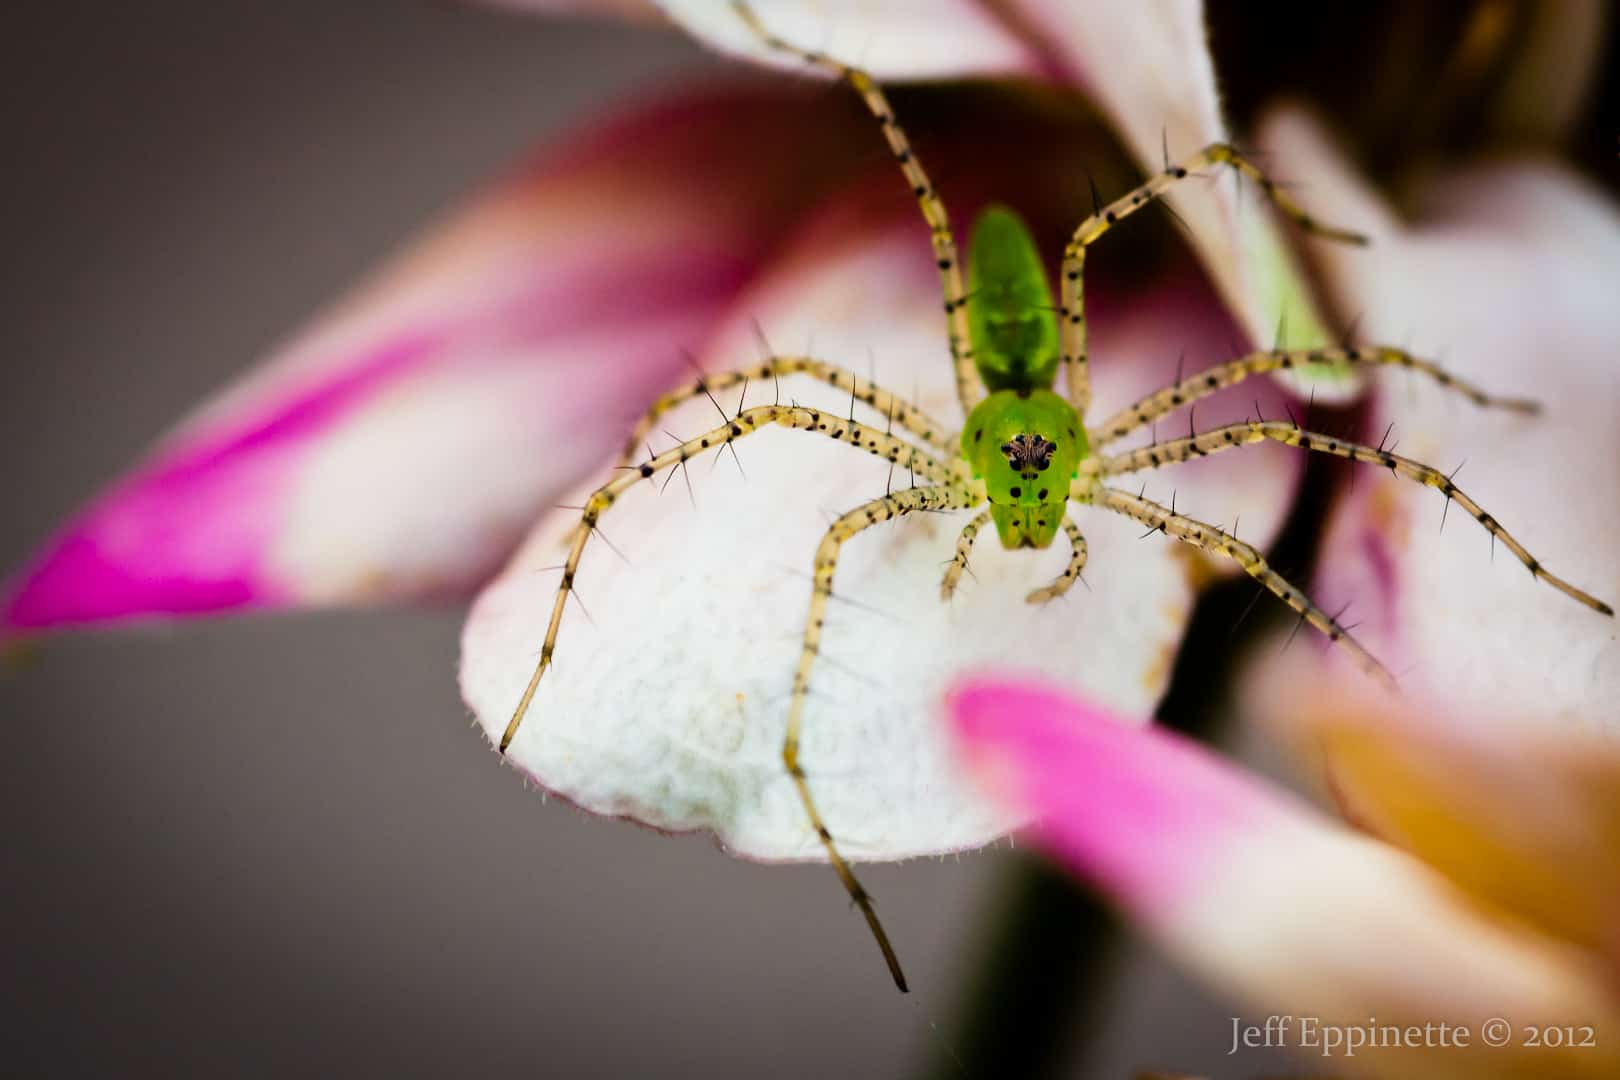 Green Lynx Spider with flower green